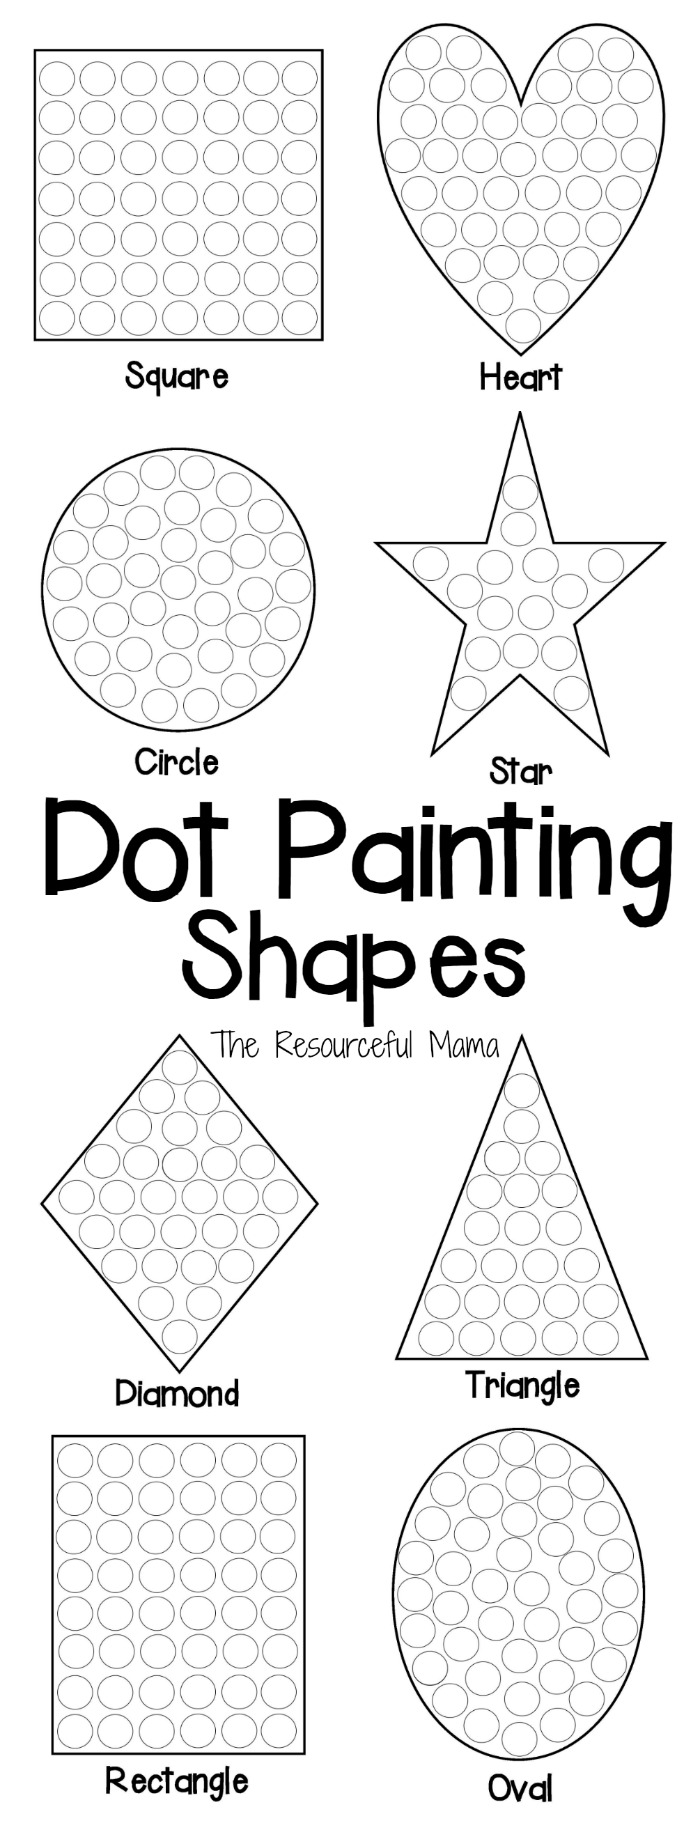 Shapes Dot Painting Free Printable The Resourceful Mama